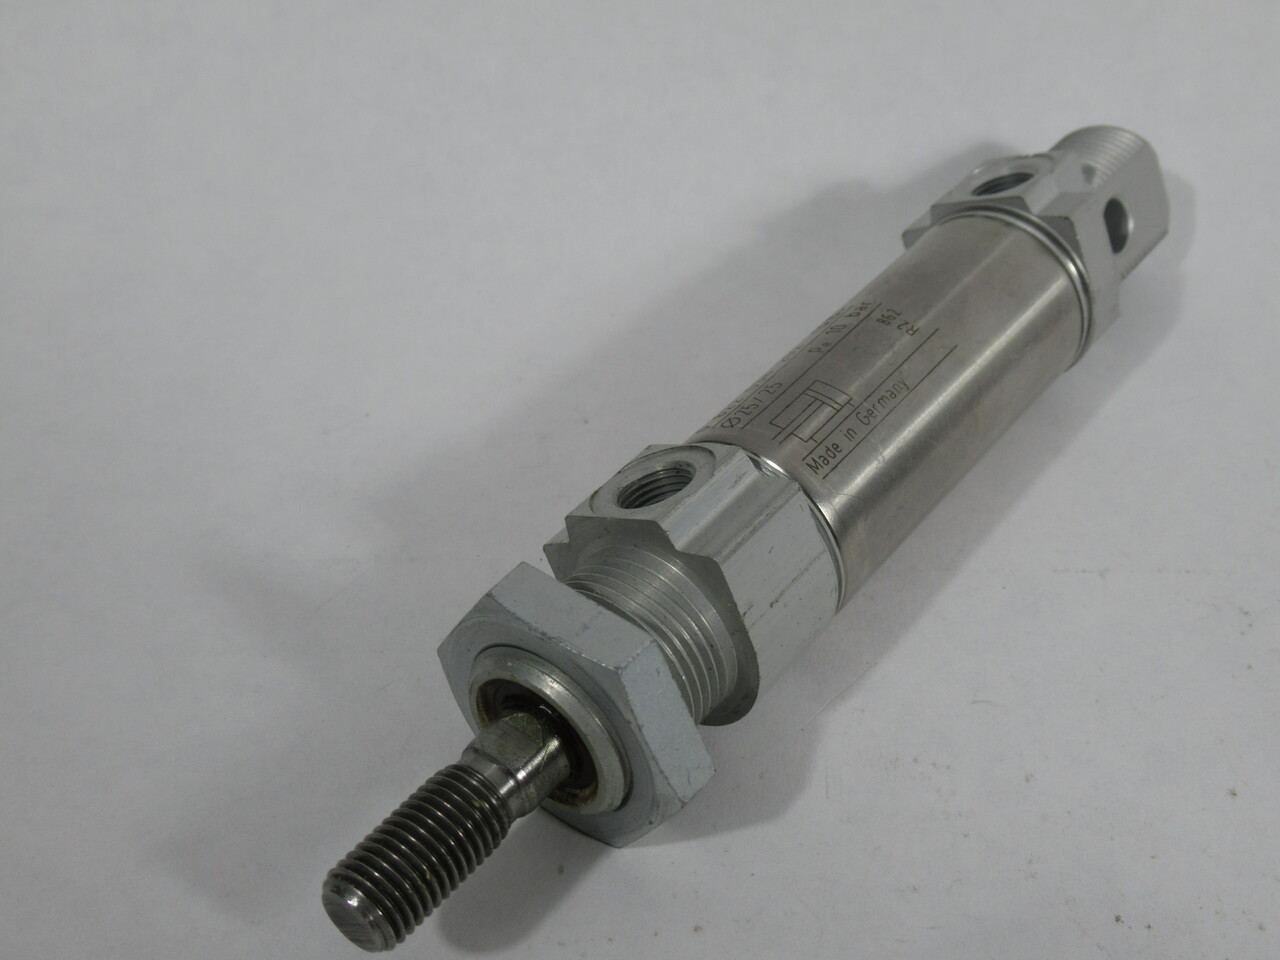 Bosch 0-822-034-202 Pneumatic Cylinder 10mm Bore 22mm Stroke USED